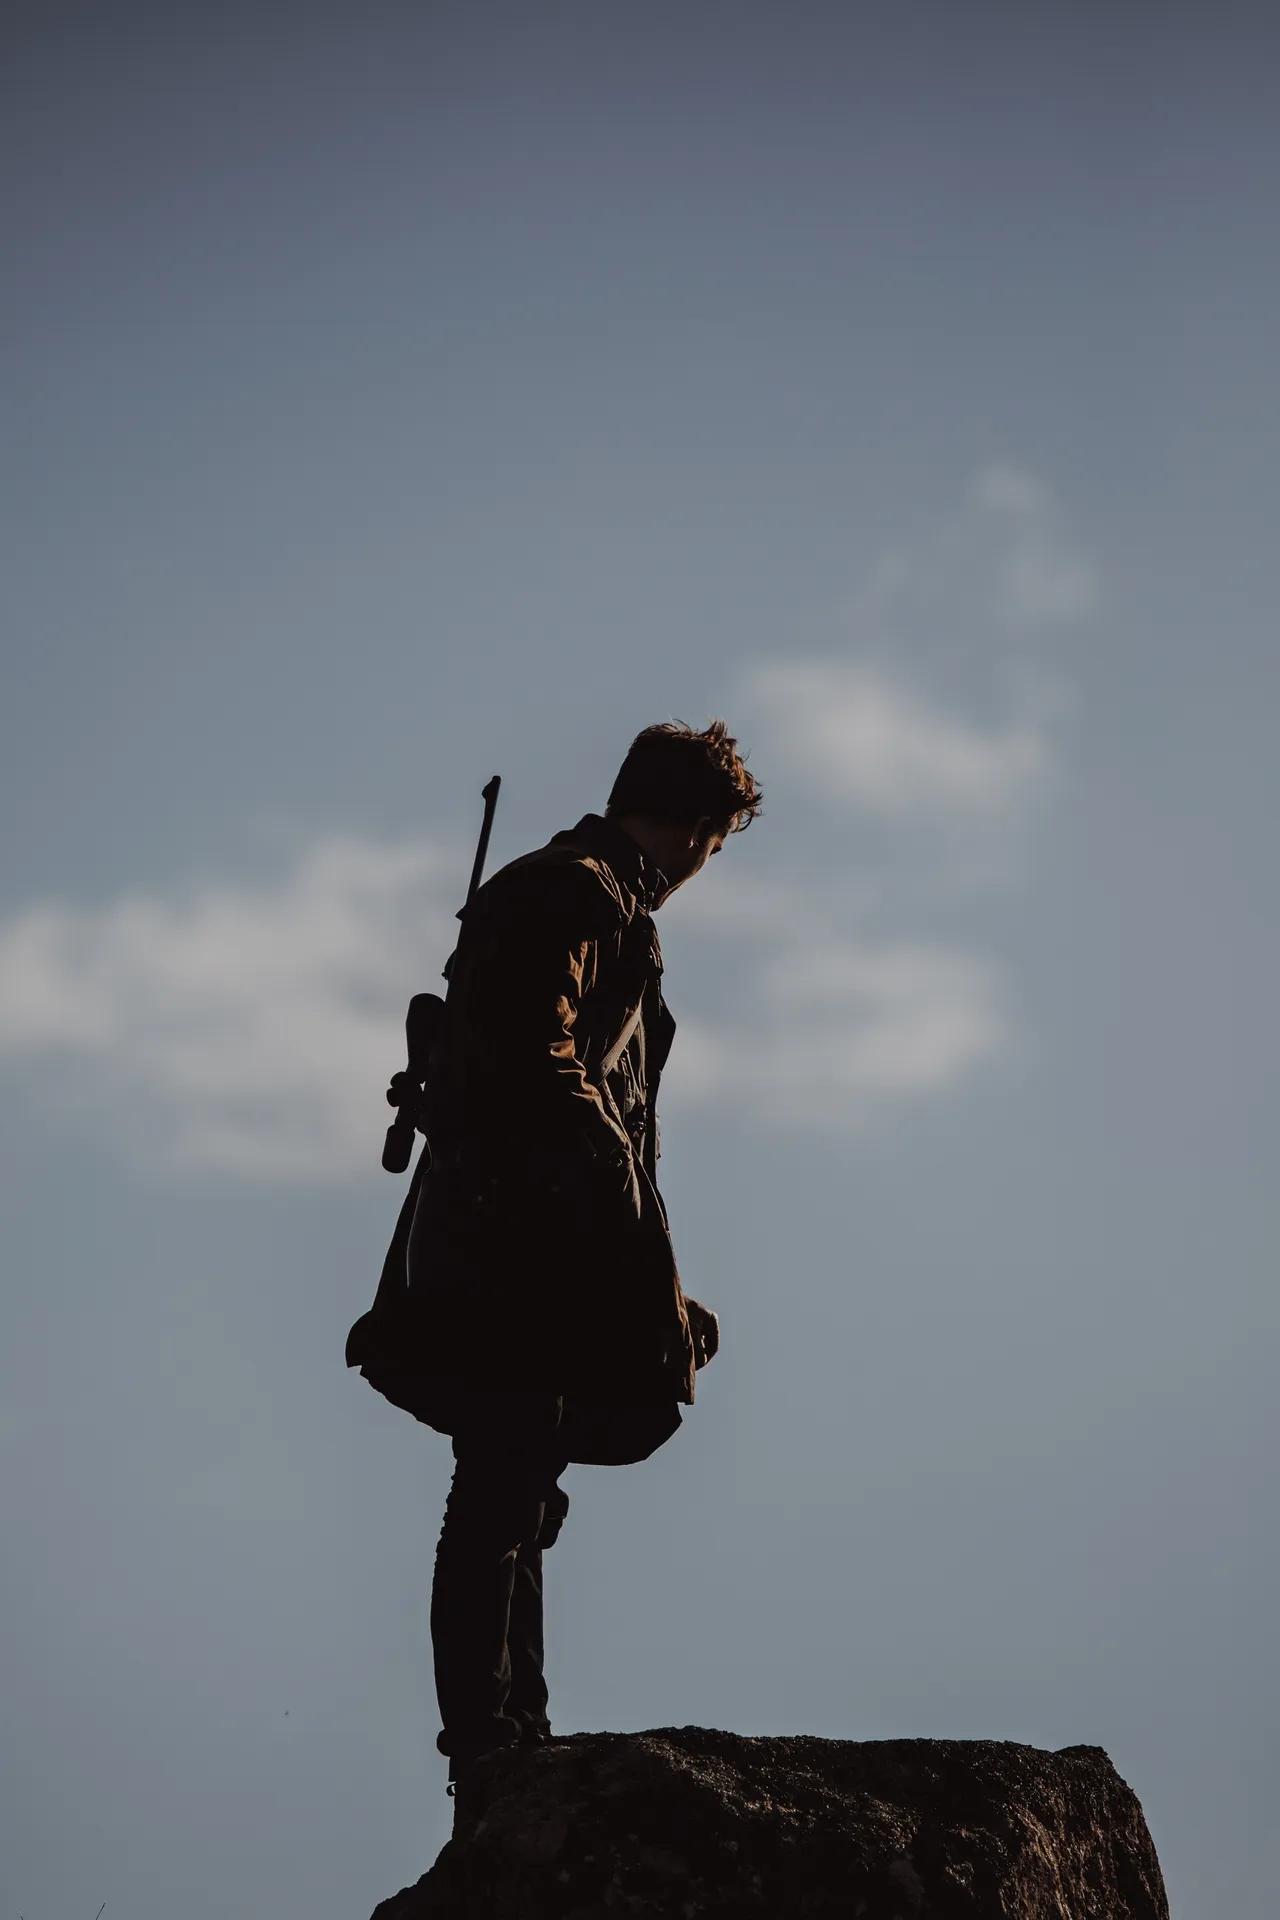 A man atop a hill with hunting gear and a hunting rifle